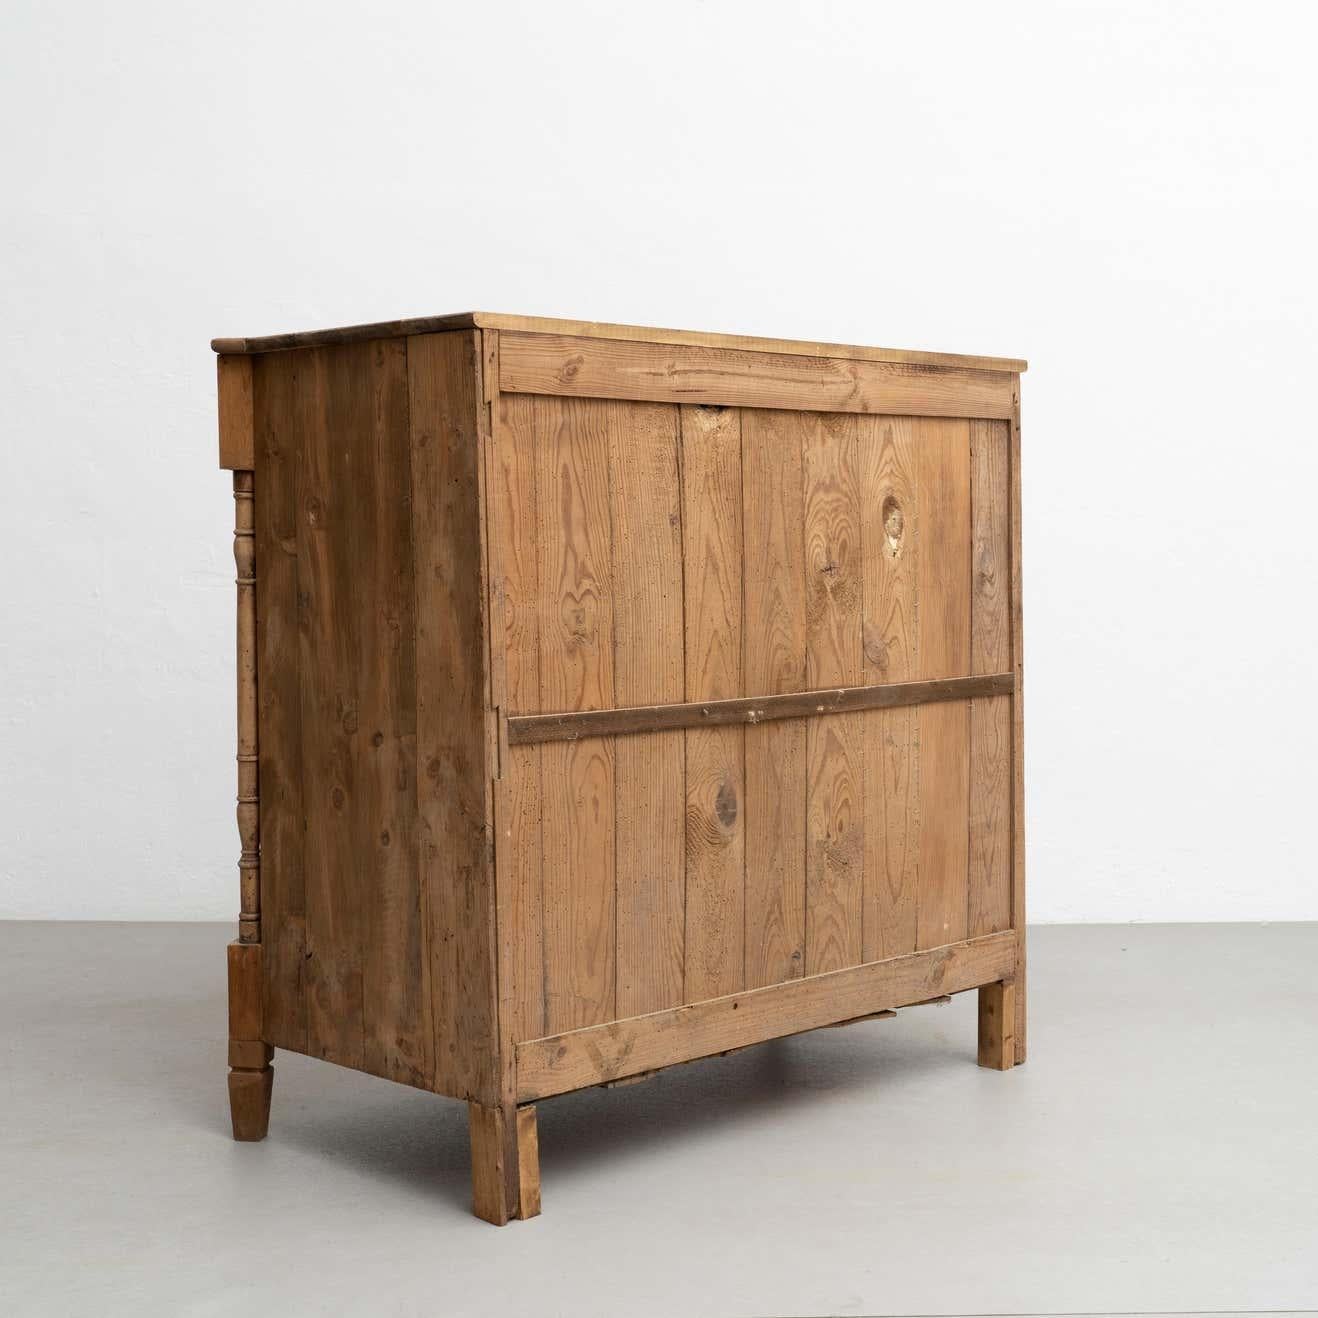 Early 20th Century Antique Traditional Spanish Pine Wood Dresser In Good Condition For Sale In Barcelona, Barcelona